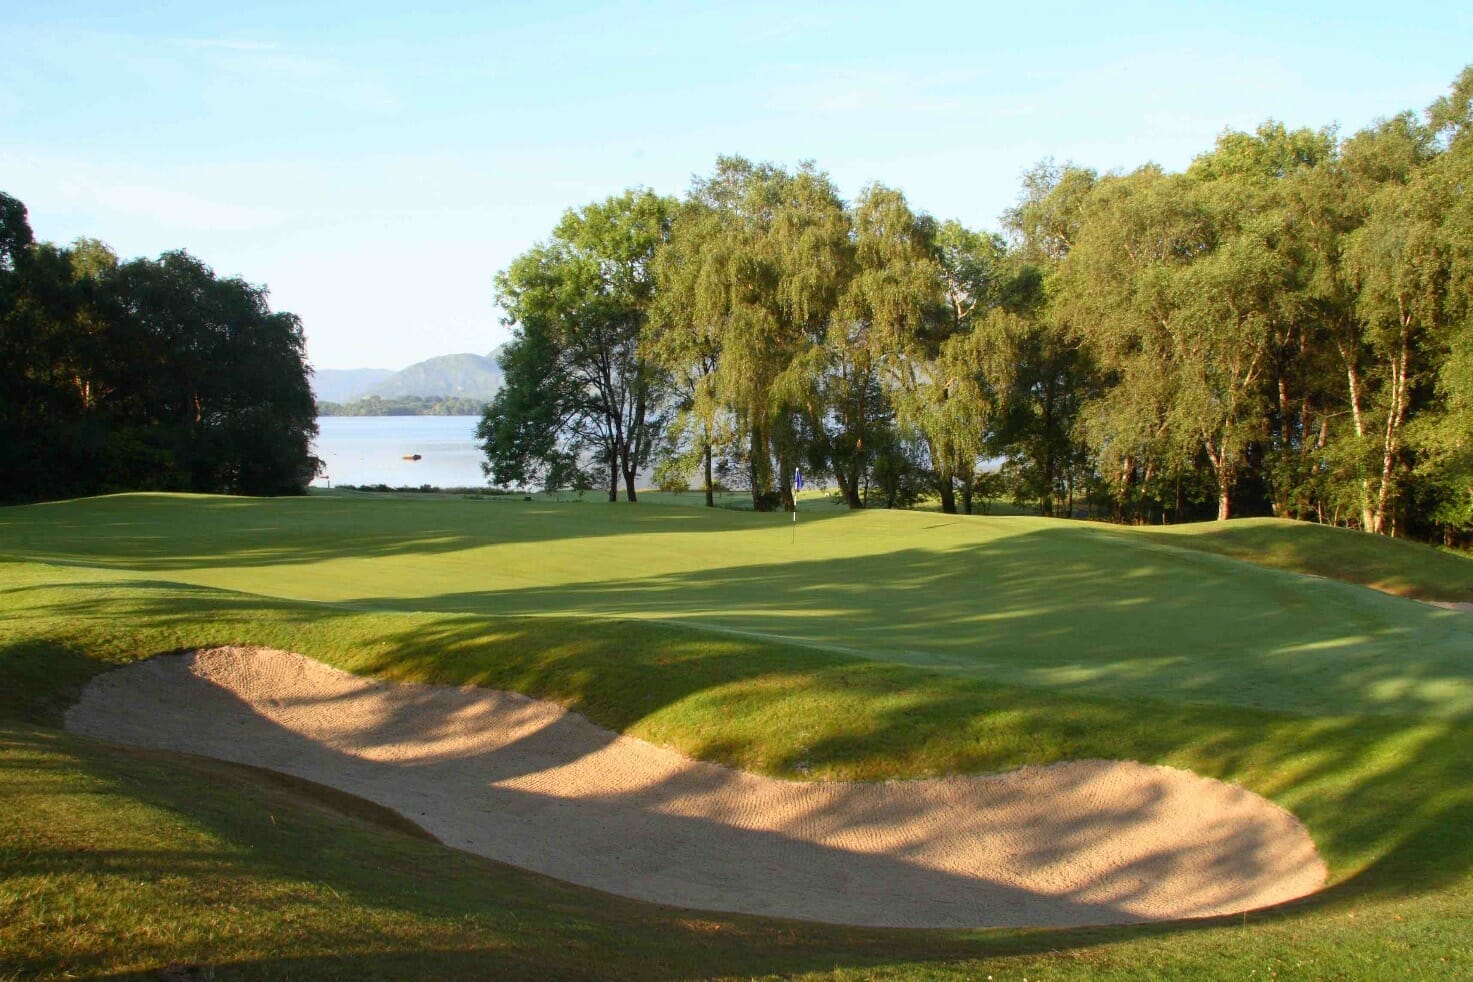 Irish Golfer Event series continues in Killarney on May 11th